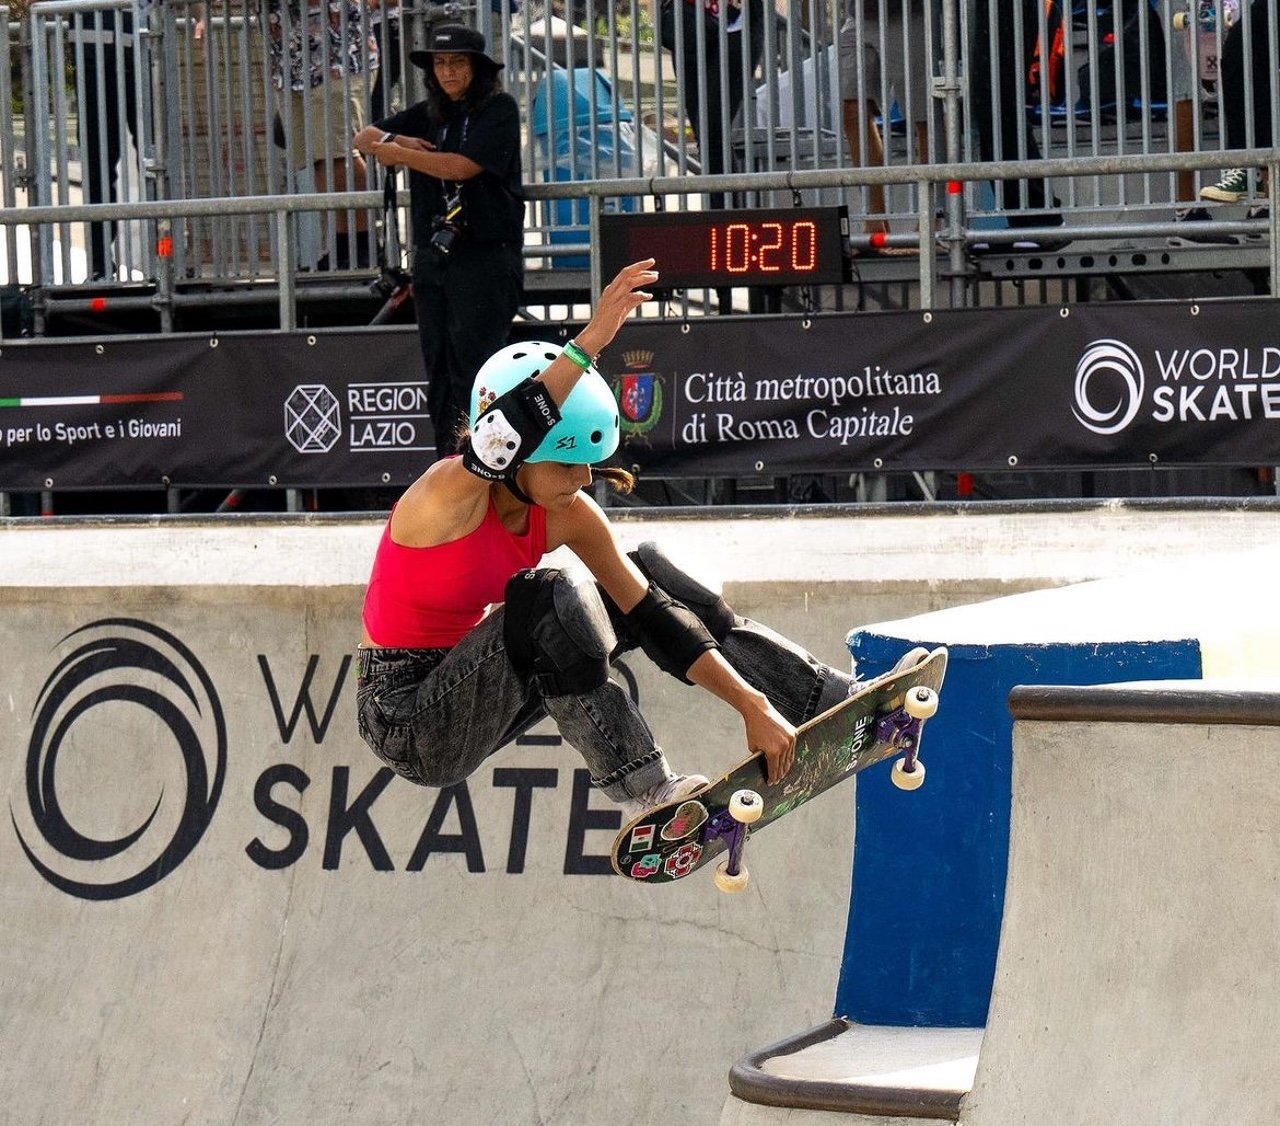 X Games: Reese Nelson, 10, becomes youngest to win medal